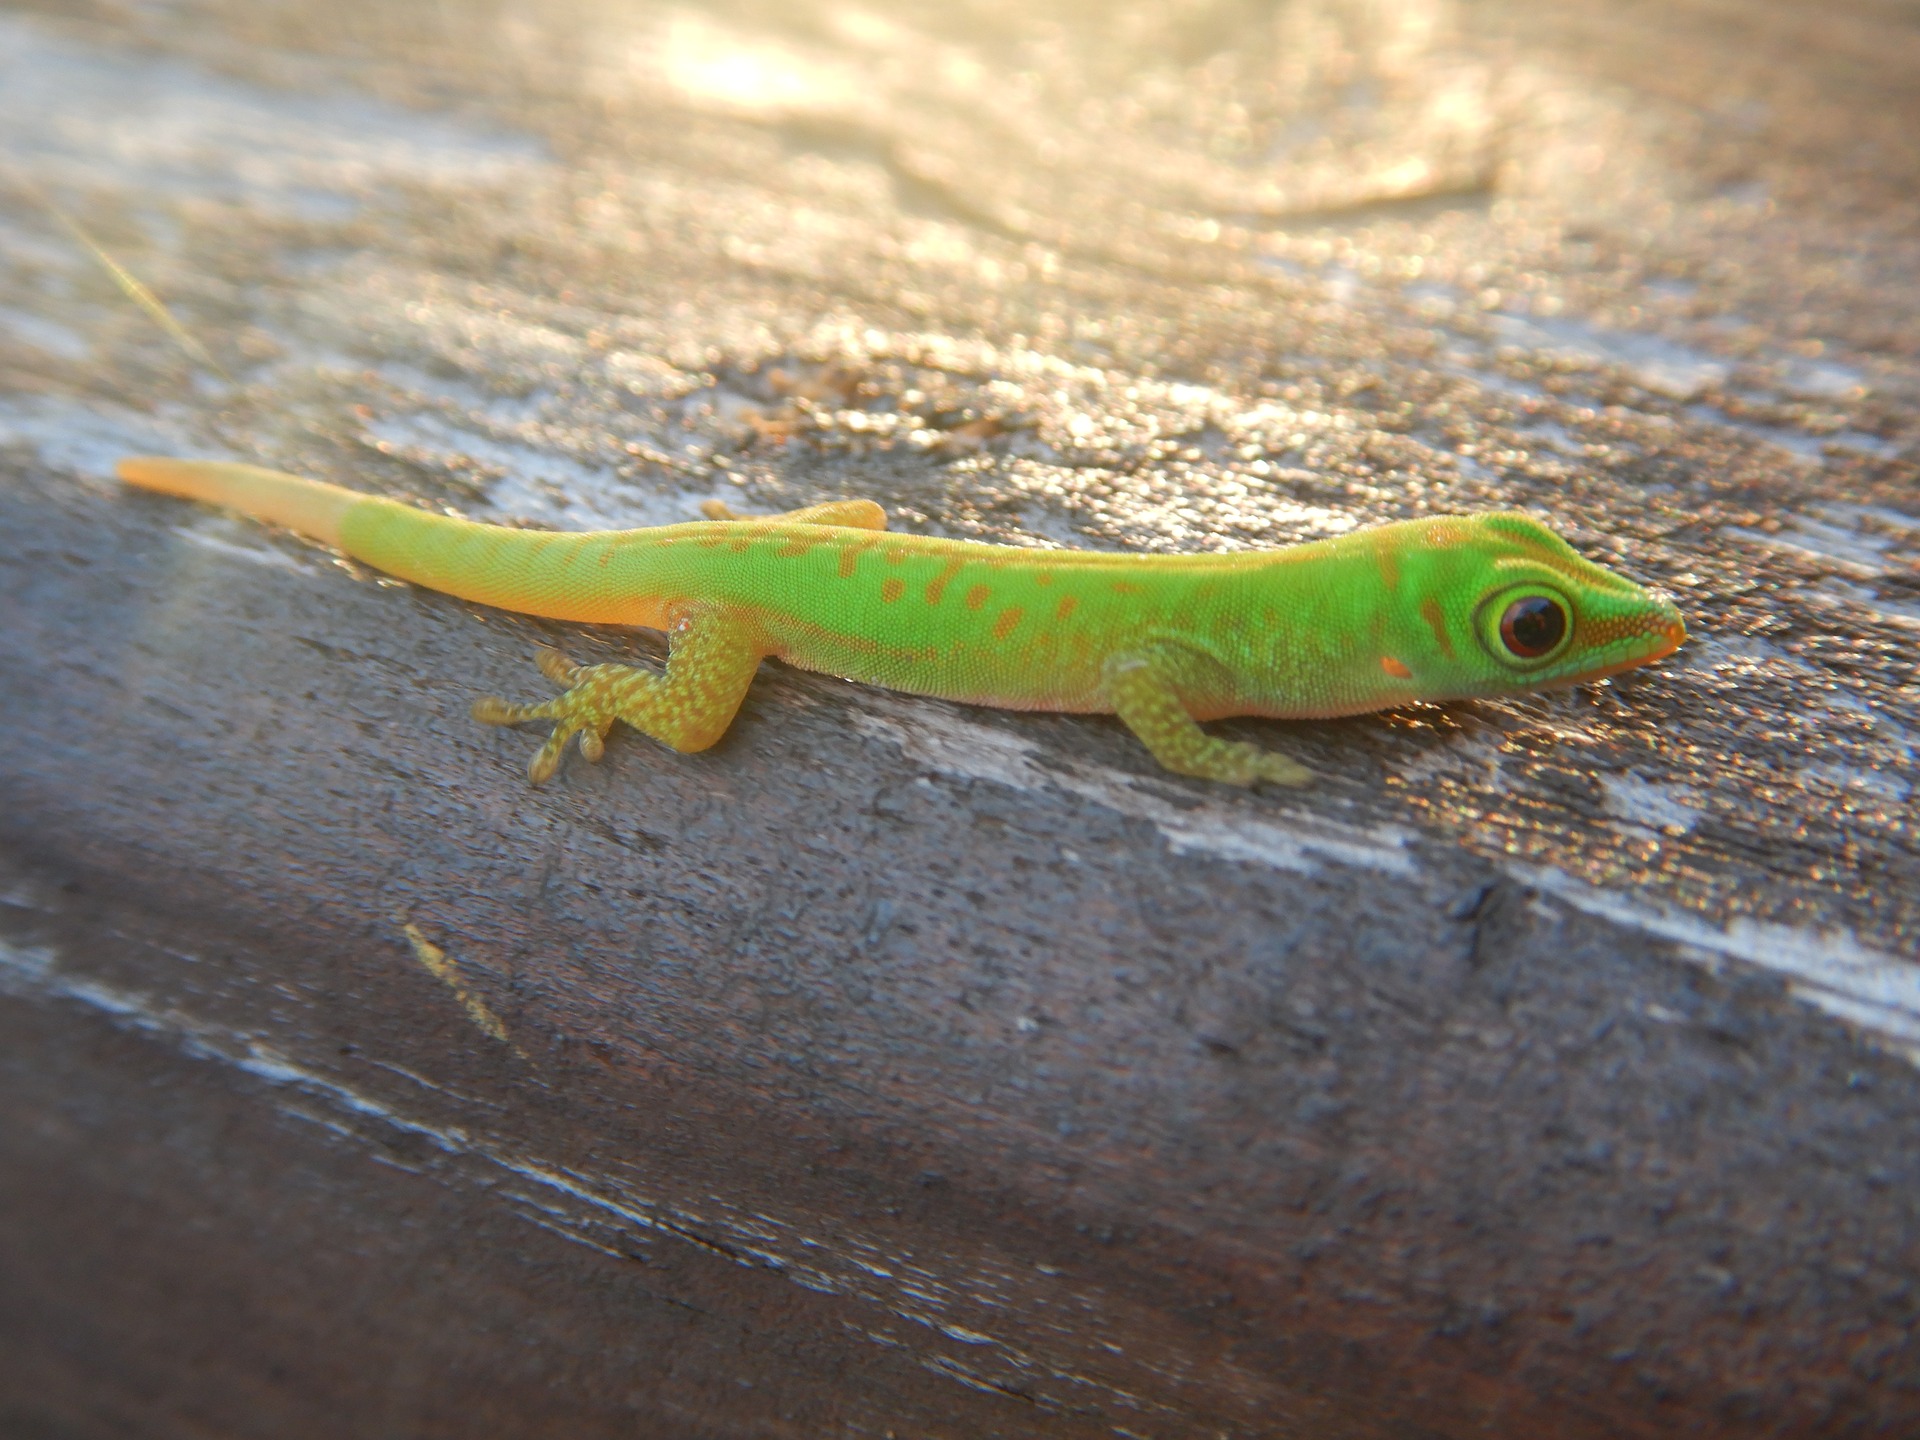 A bright green gecko in the Seychelles